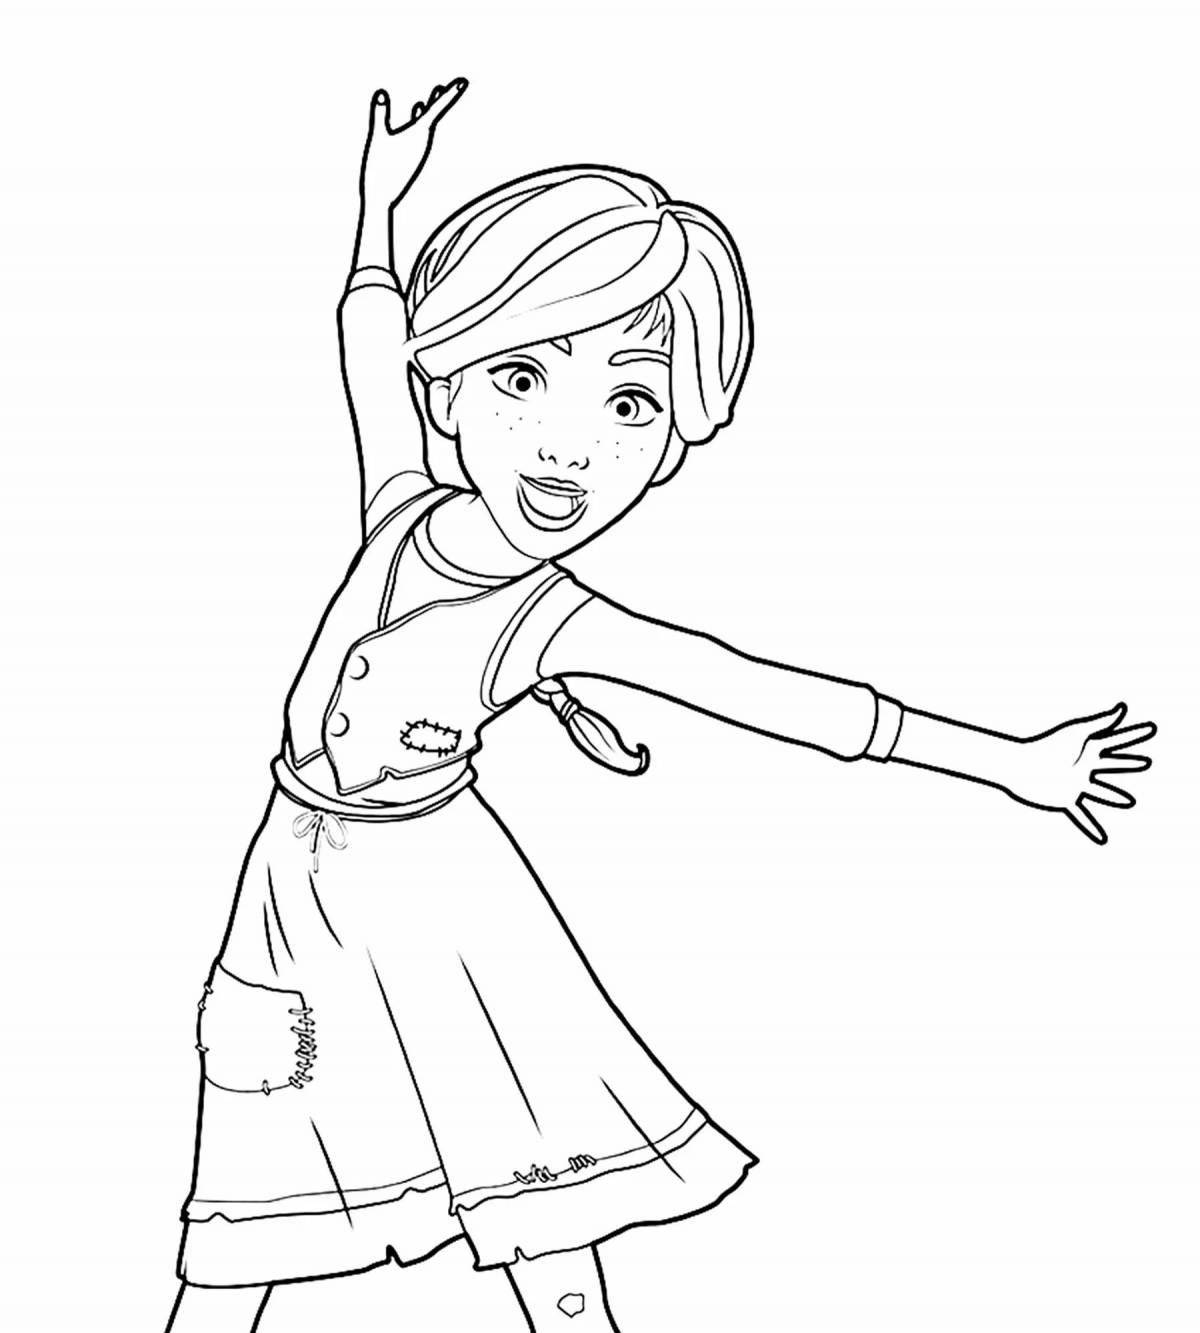 Glowing ballerina coloring page